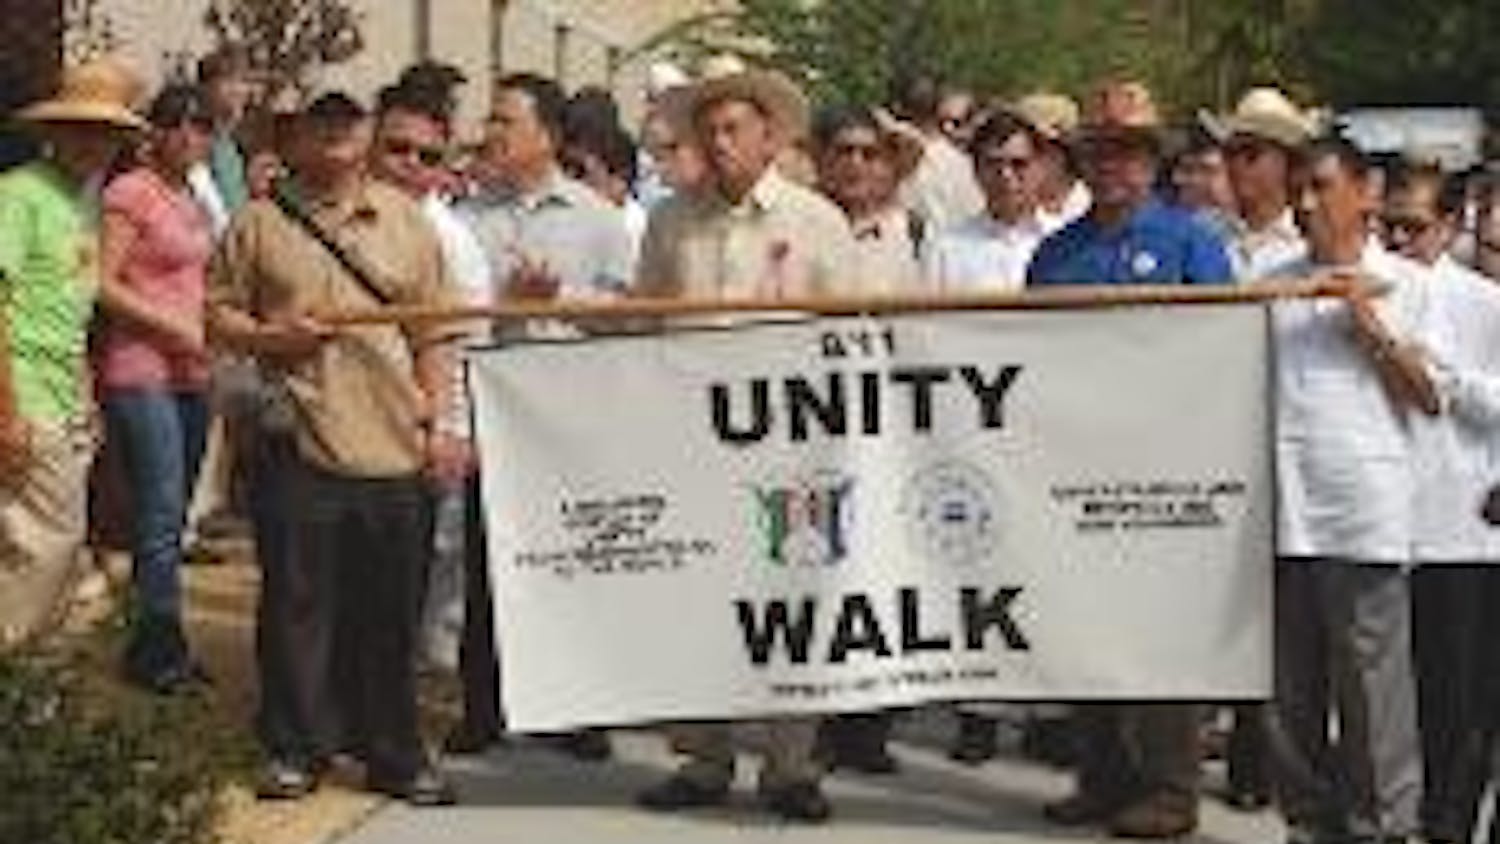 UNIFIED - Hundreds of people gather from all walks of life to promote religious tolerance. The walk promoted interfaith dialogue to help resolve problems such as the Israeli-Palestinian conflict. Christian, Jewish and Muslim religious leaders spoke at the